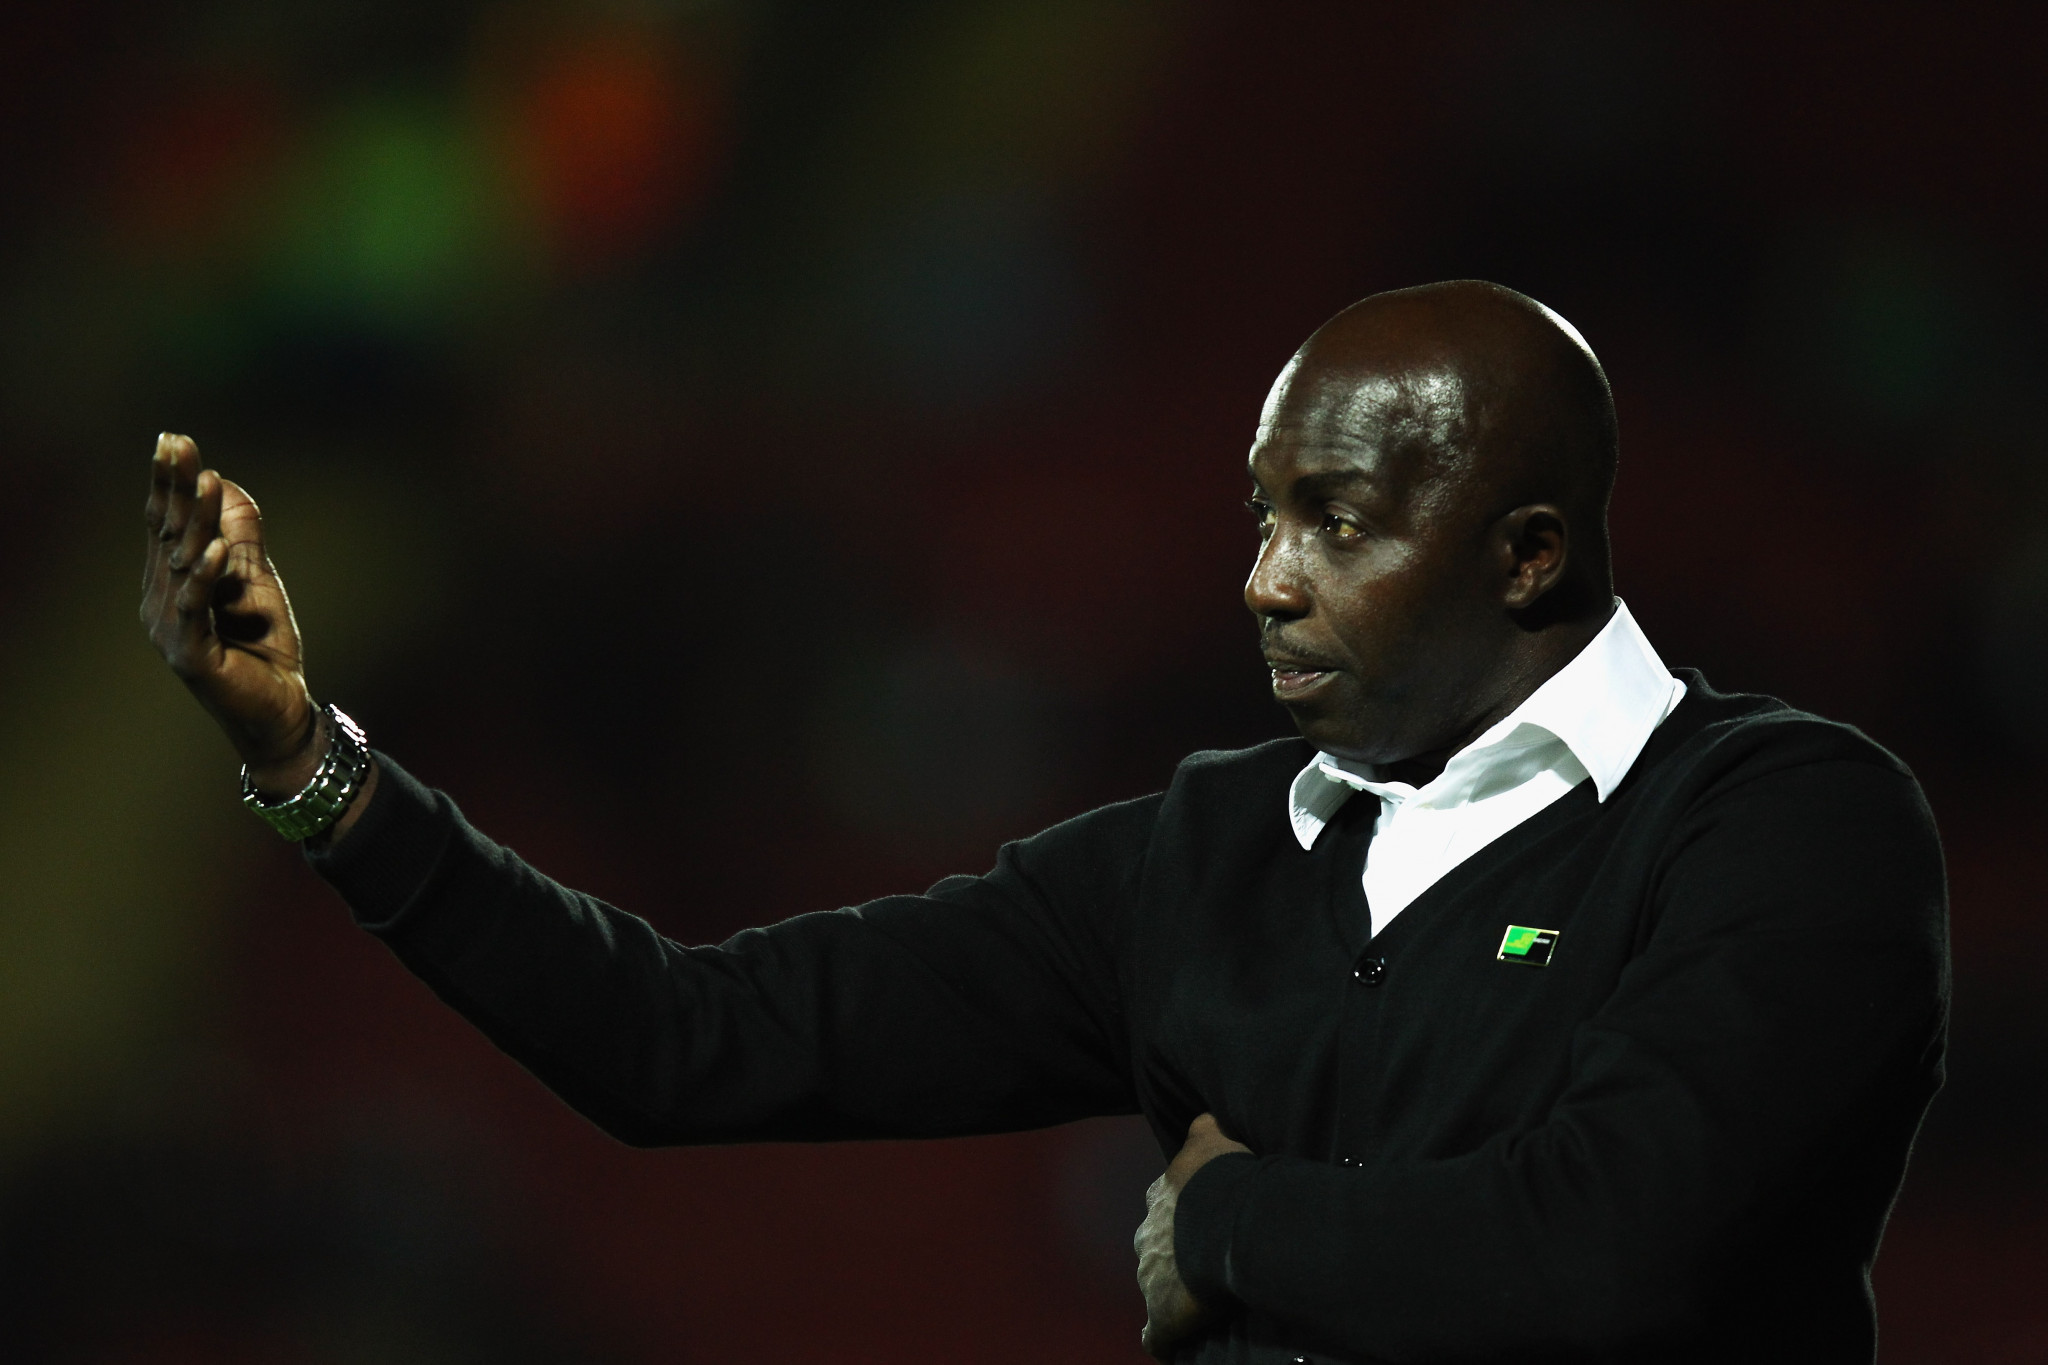 Samson Siasia was found to have accepted that he would receive bribes